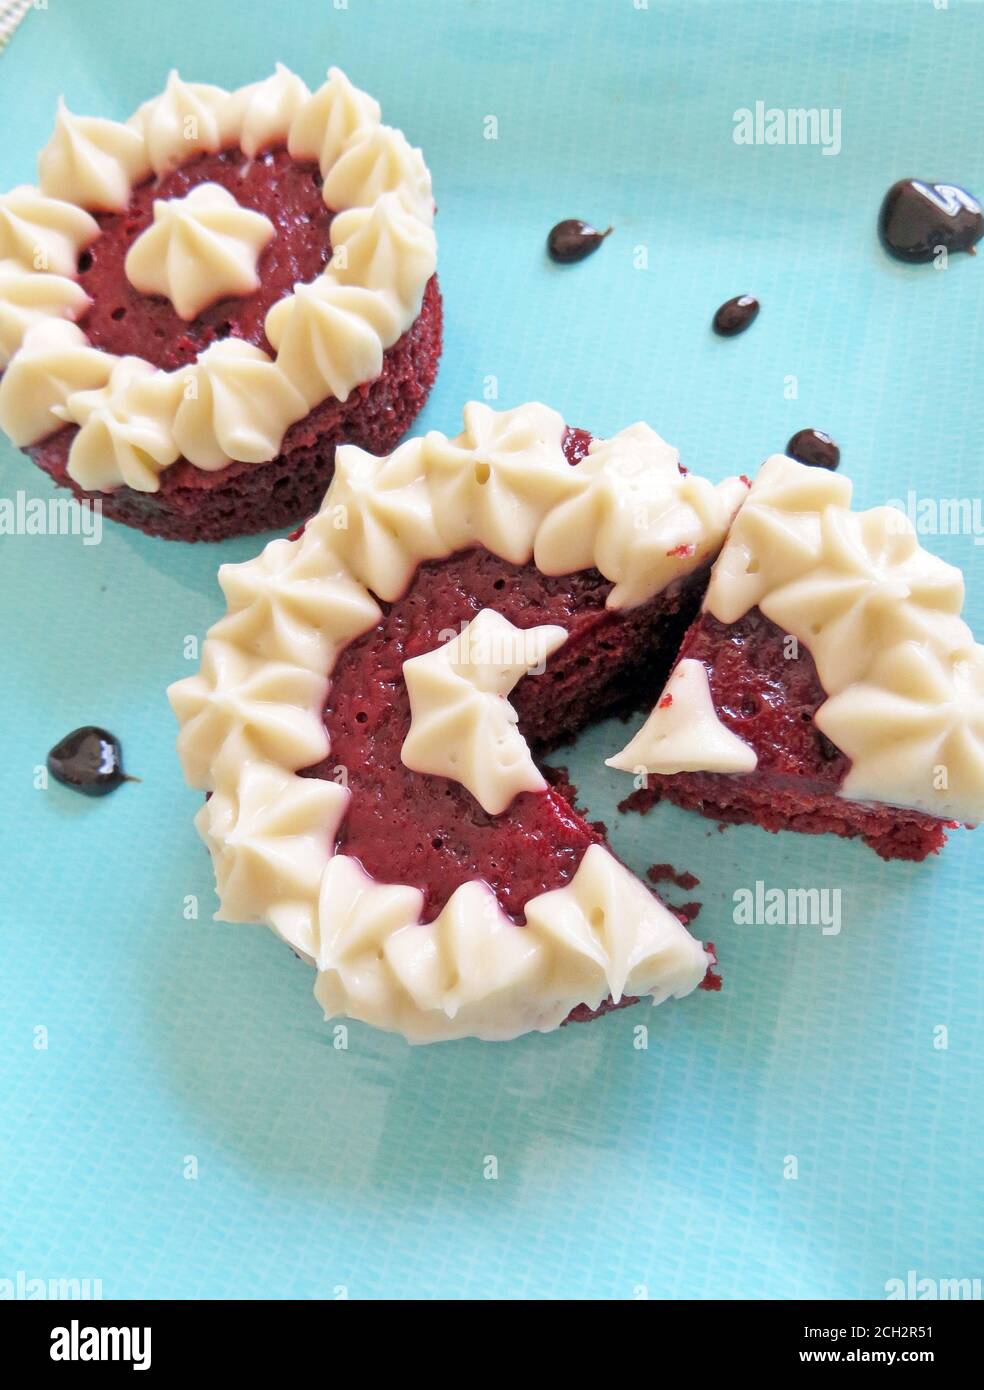 Two small red velvet cakes with white frosting Stock Photo